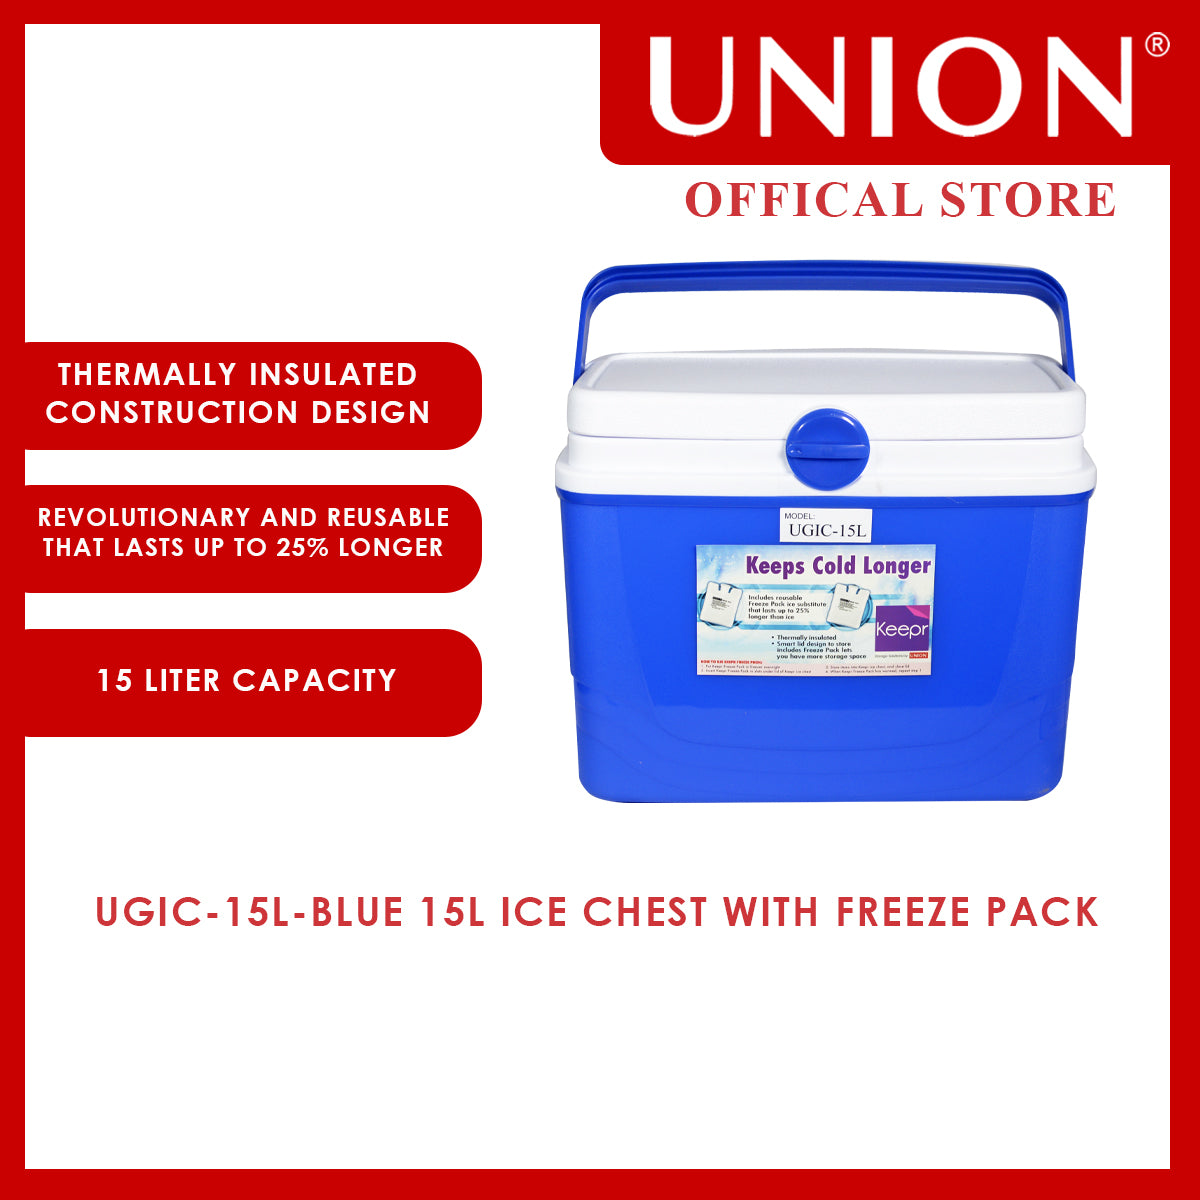 Union® Keepr 15L Ice Chest with Freeze Pack